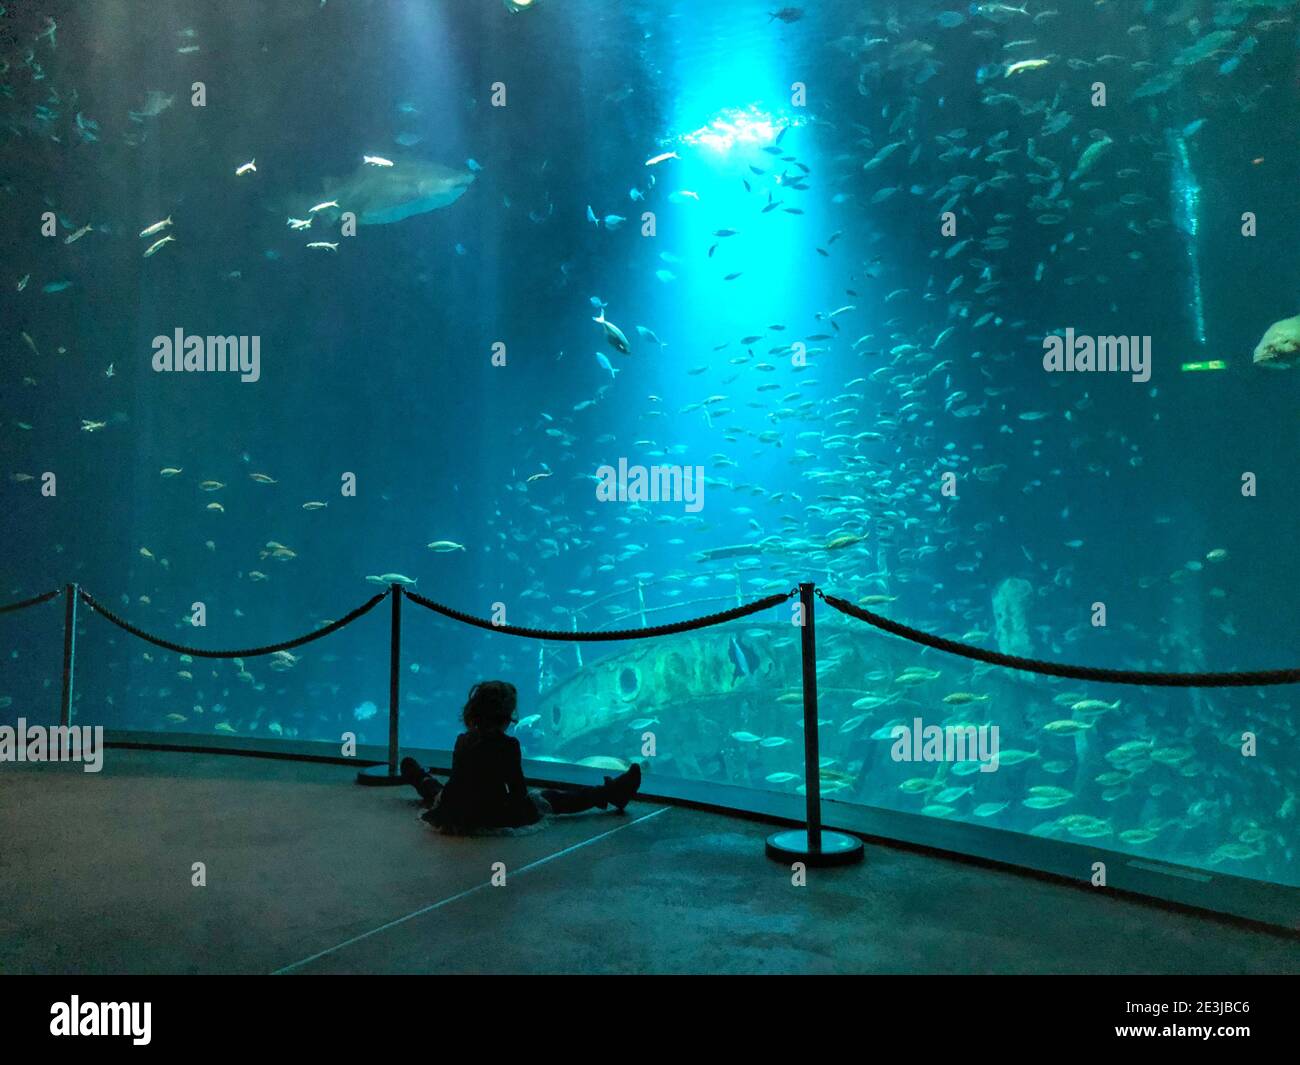 Girl in front of a large aquarium Stock Photo